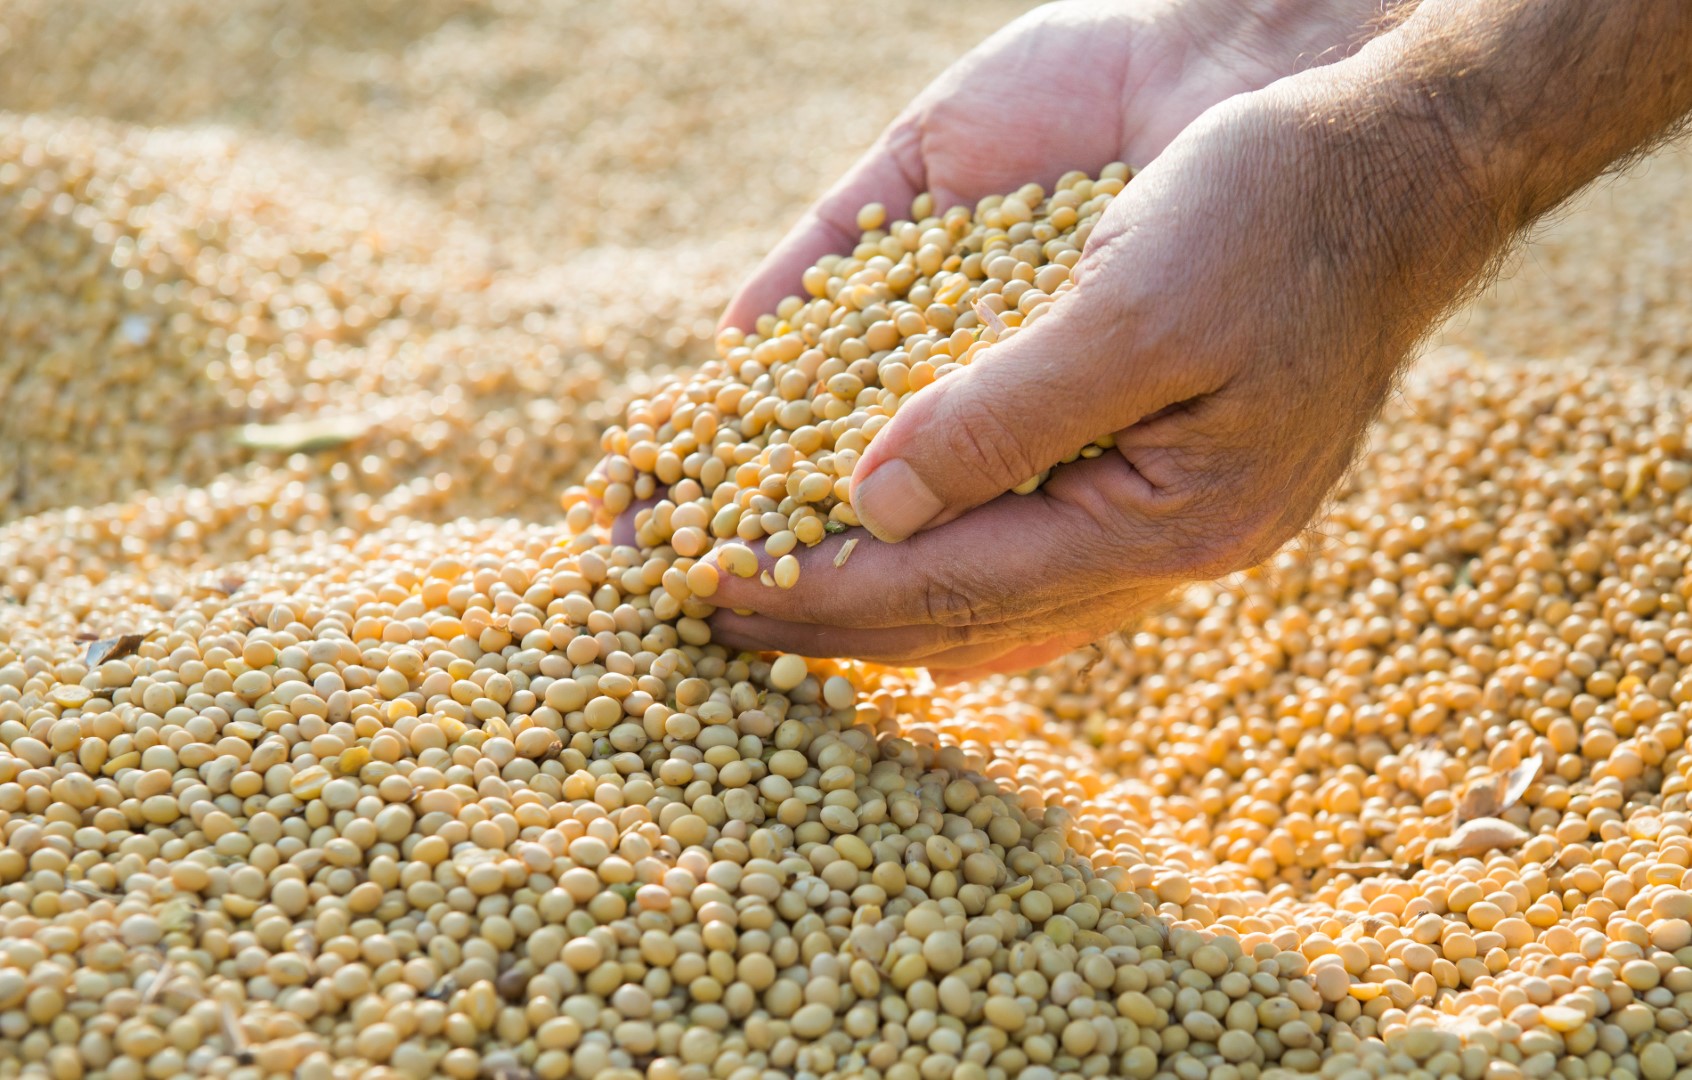 Person running their hands through soy beans after they have been harvested.